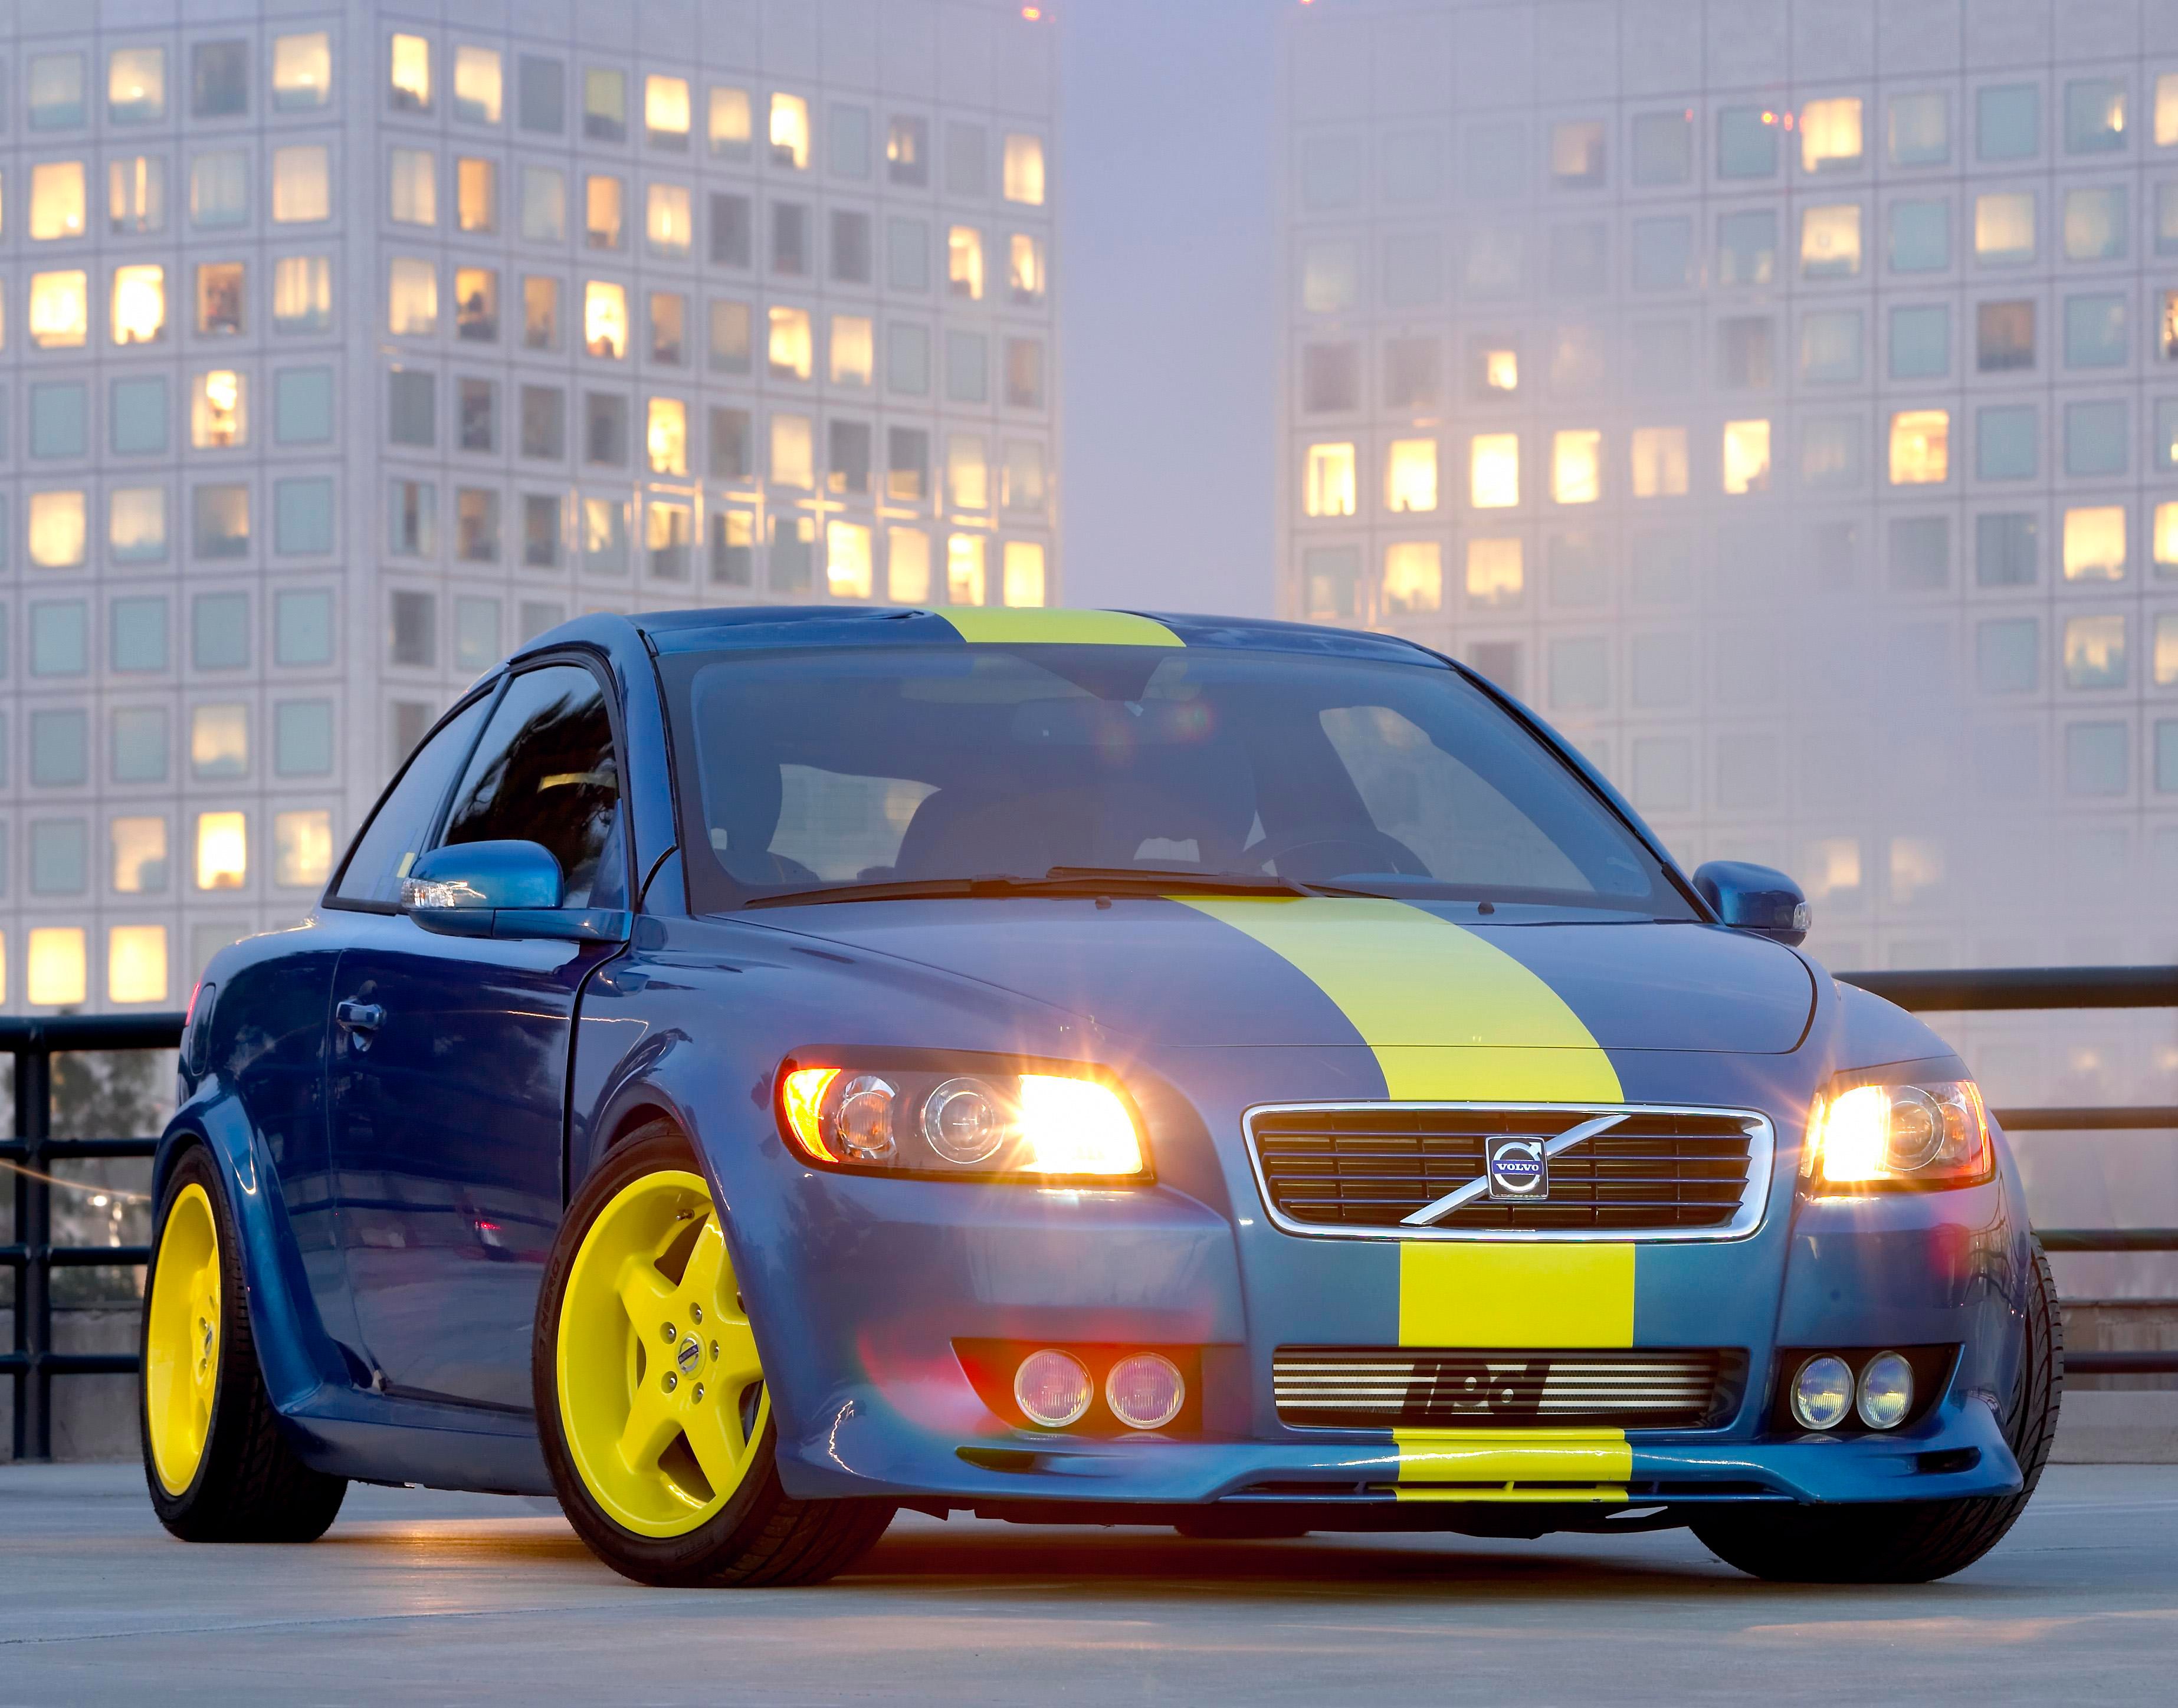 2007 Volvo C30 by IPD